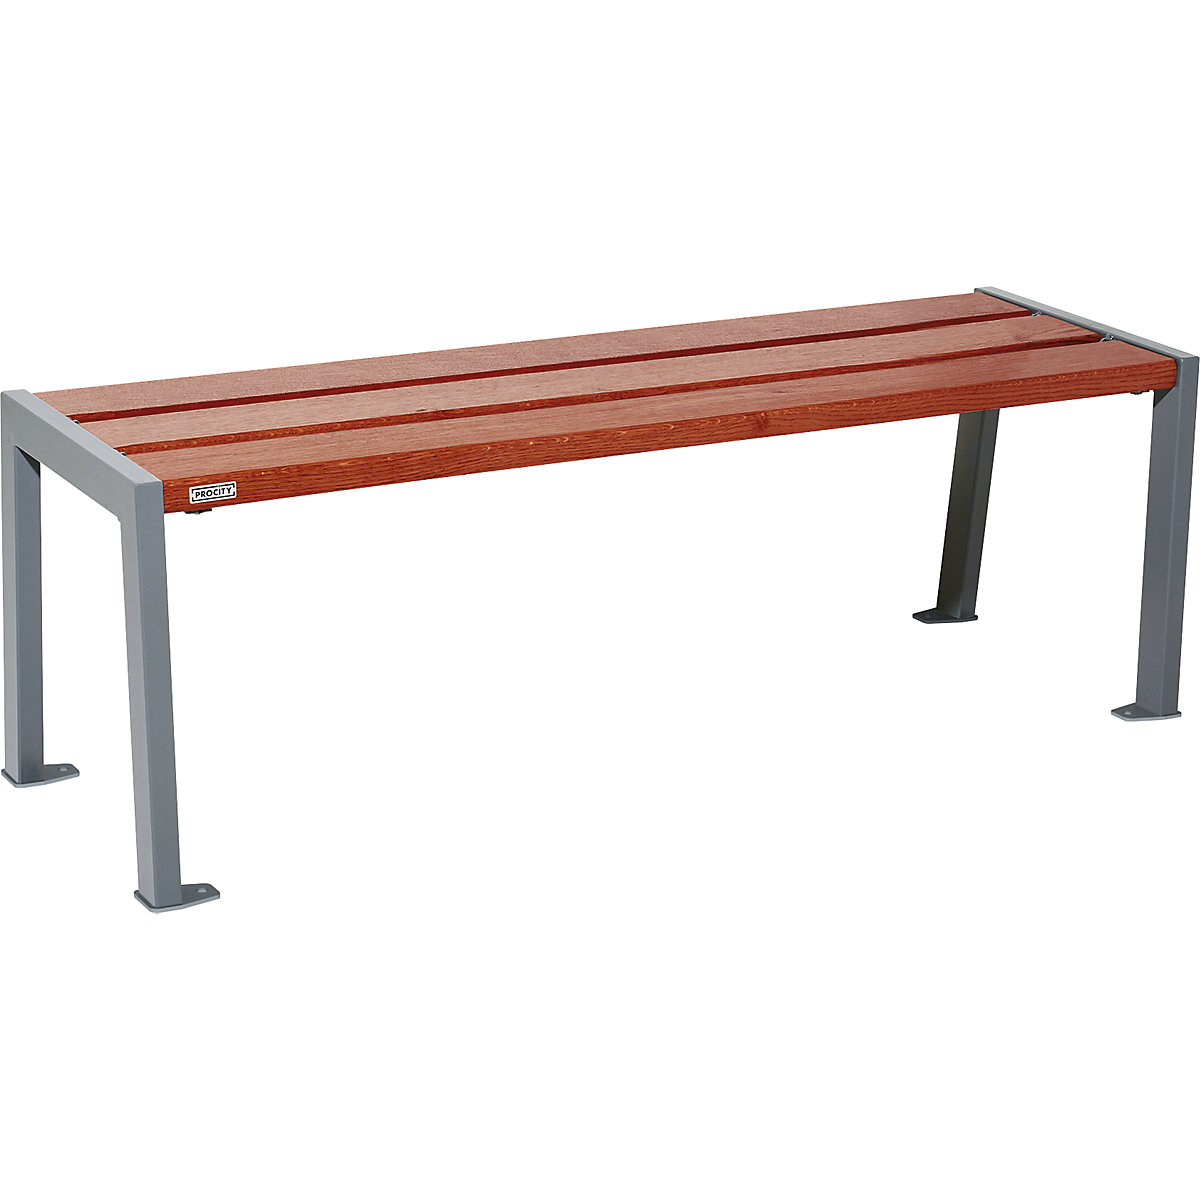 SILAOS® wooden bench without back rest – PROCITY